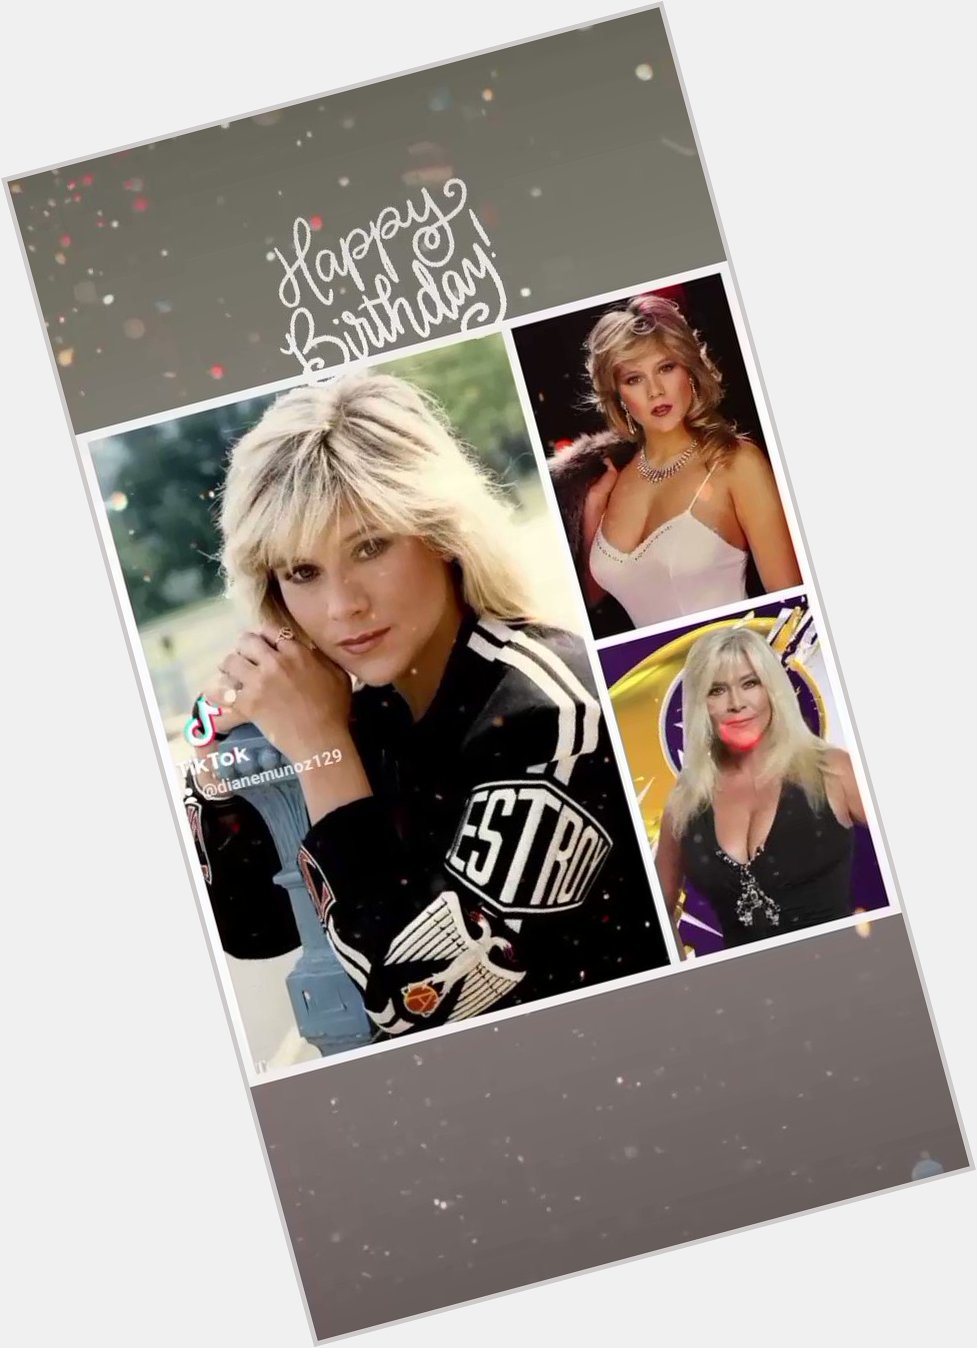 Happy 57th Birthday To The Amazingly Talented Samantha Fox (Vocalist, Model & Actress) April 15th, 1966 